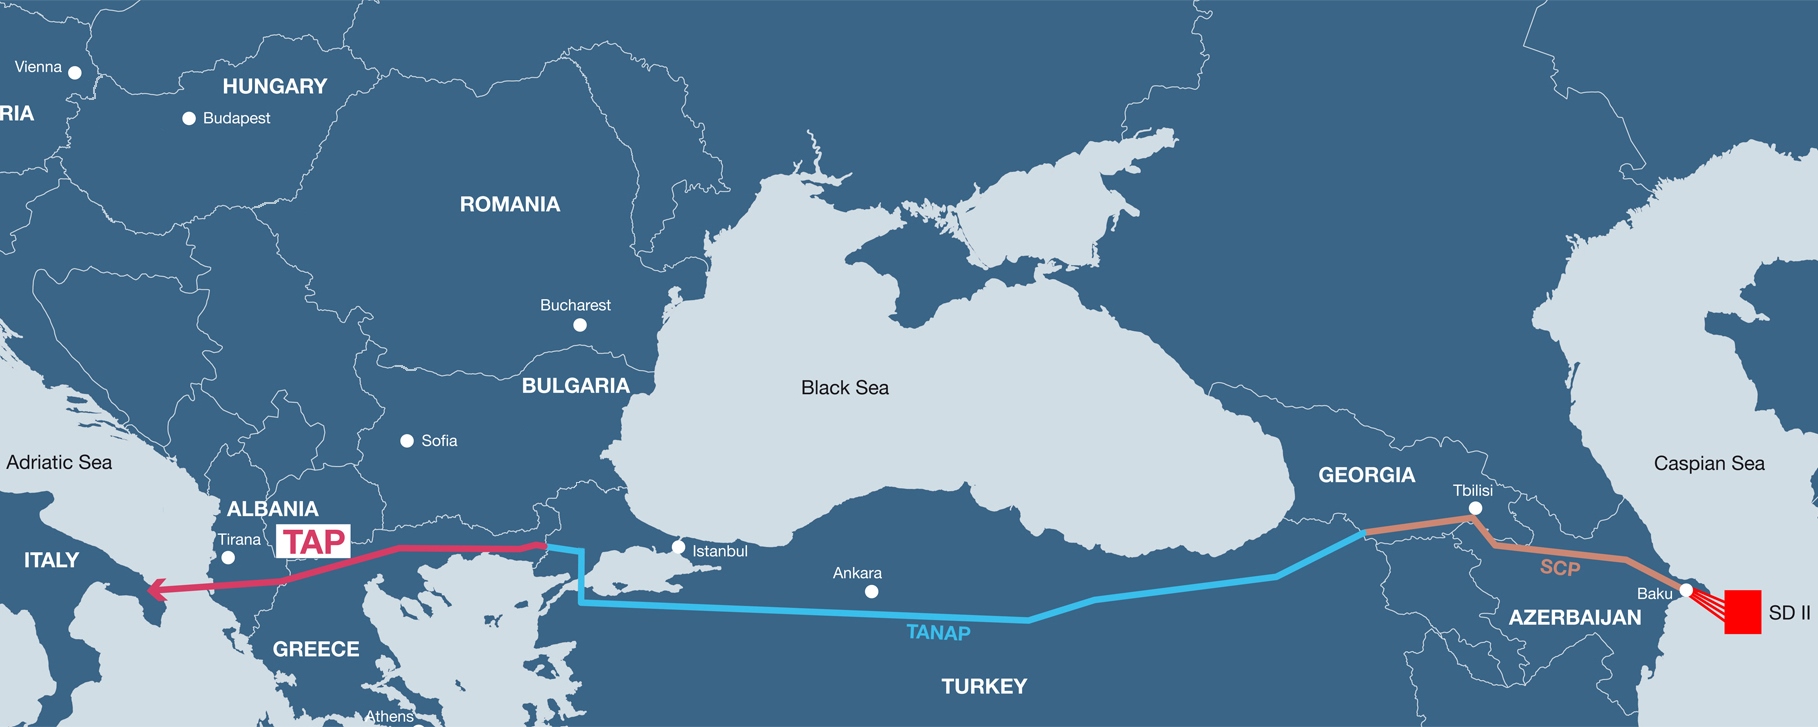 Shah-Deniz-Stage-2-and-SCP-Expansion-Projects-Announced.jpg